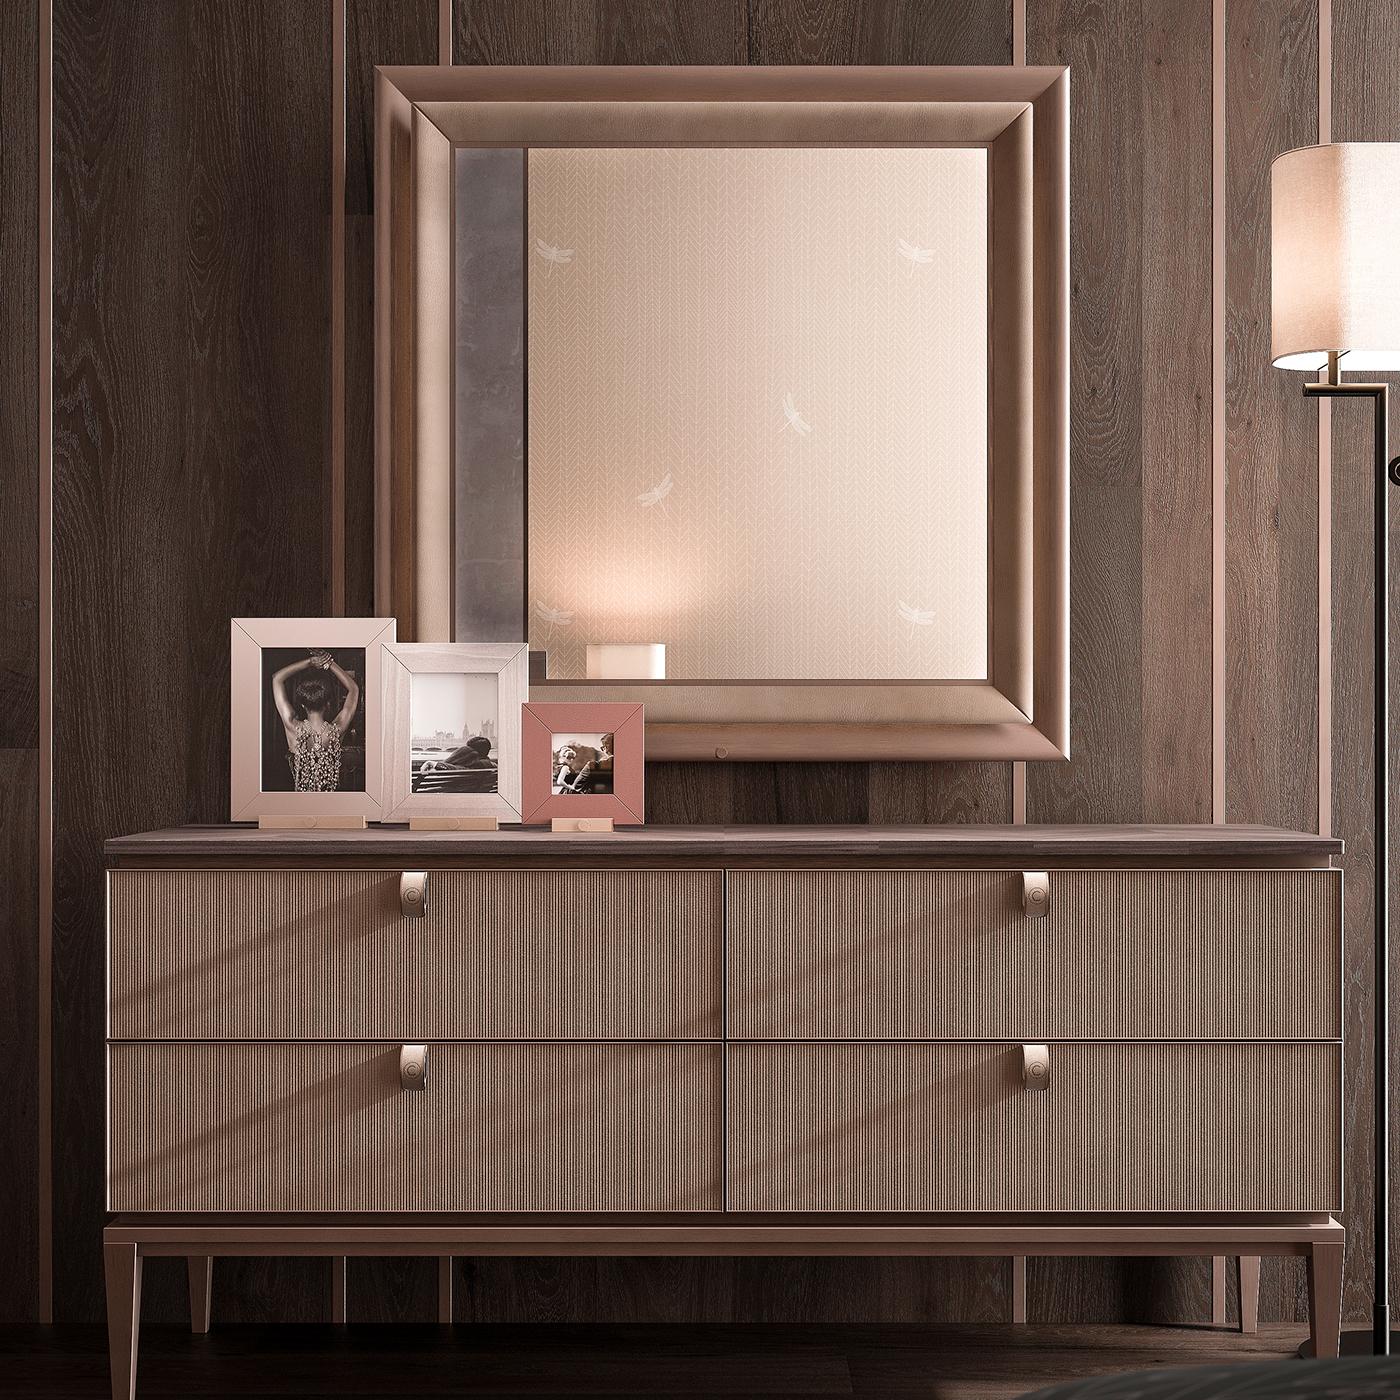 Stylish and sophisticated, this enchanting mirror features nubuck leather and a metal effect lacquered frame. With its soft beige color, it is the perfect choice to compliment the contemporary decor in any room, and comes complete with an LED